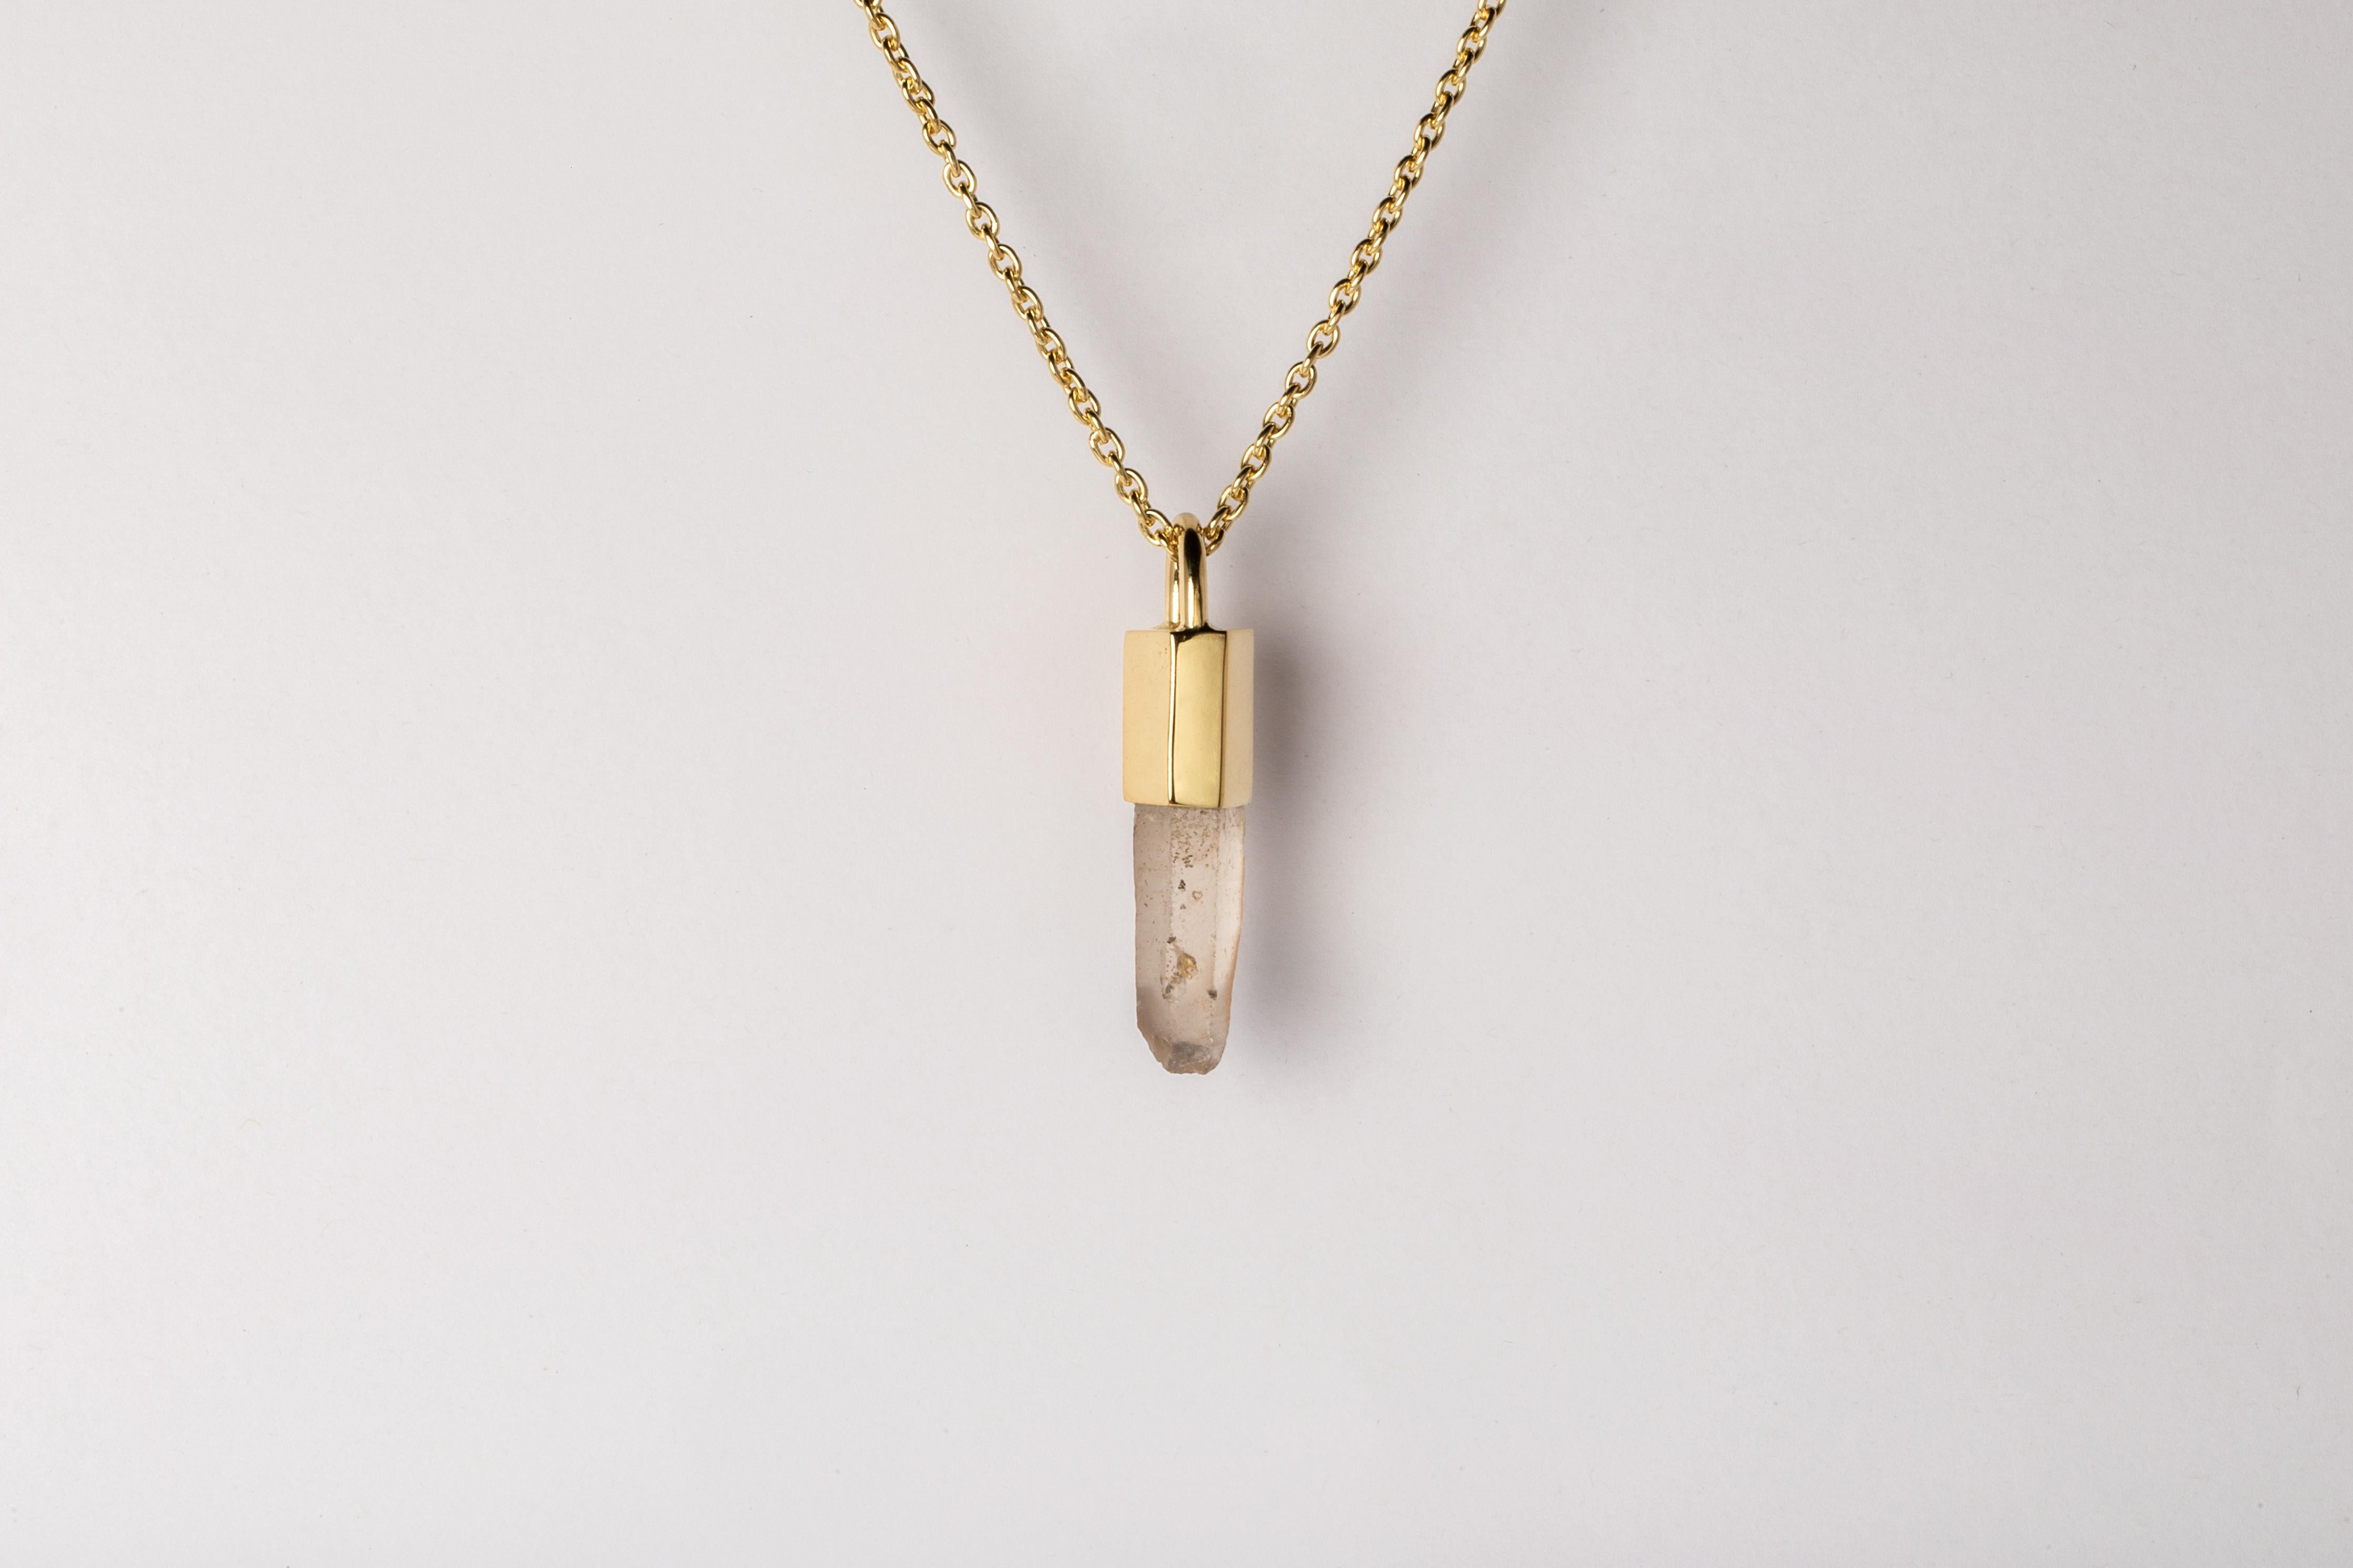 Pendant necklace in brass, sterling silver, and a rough of misc quartz. Brass and sterling silver are substrates, polished, and electroplated with 18k gold.
The Talisman series is an exploration into the power of natural crystals. The crystals used